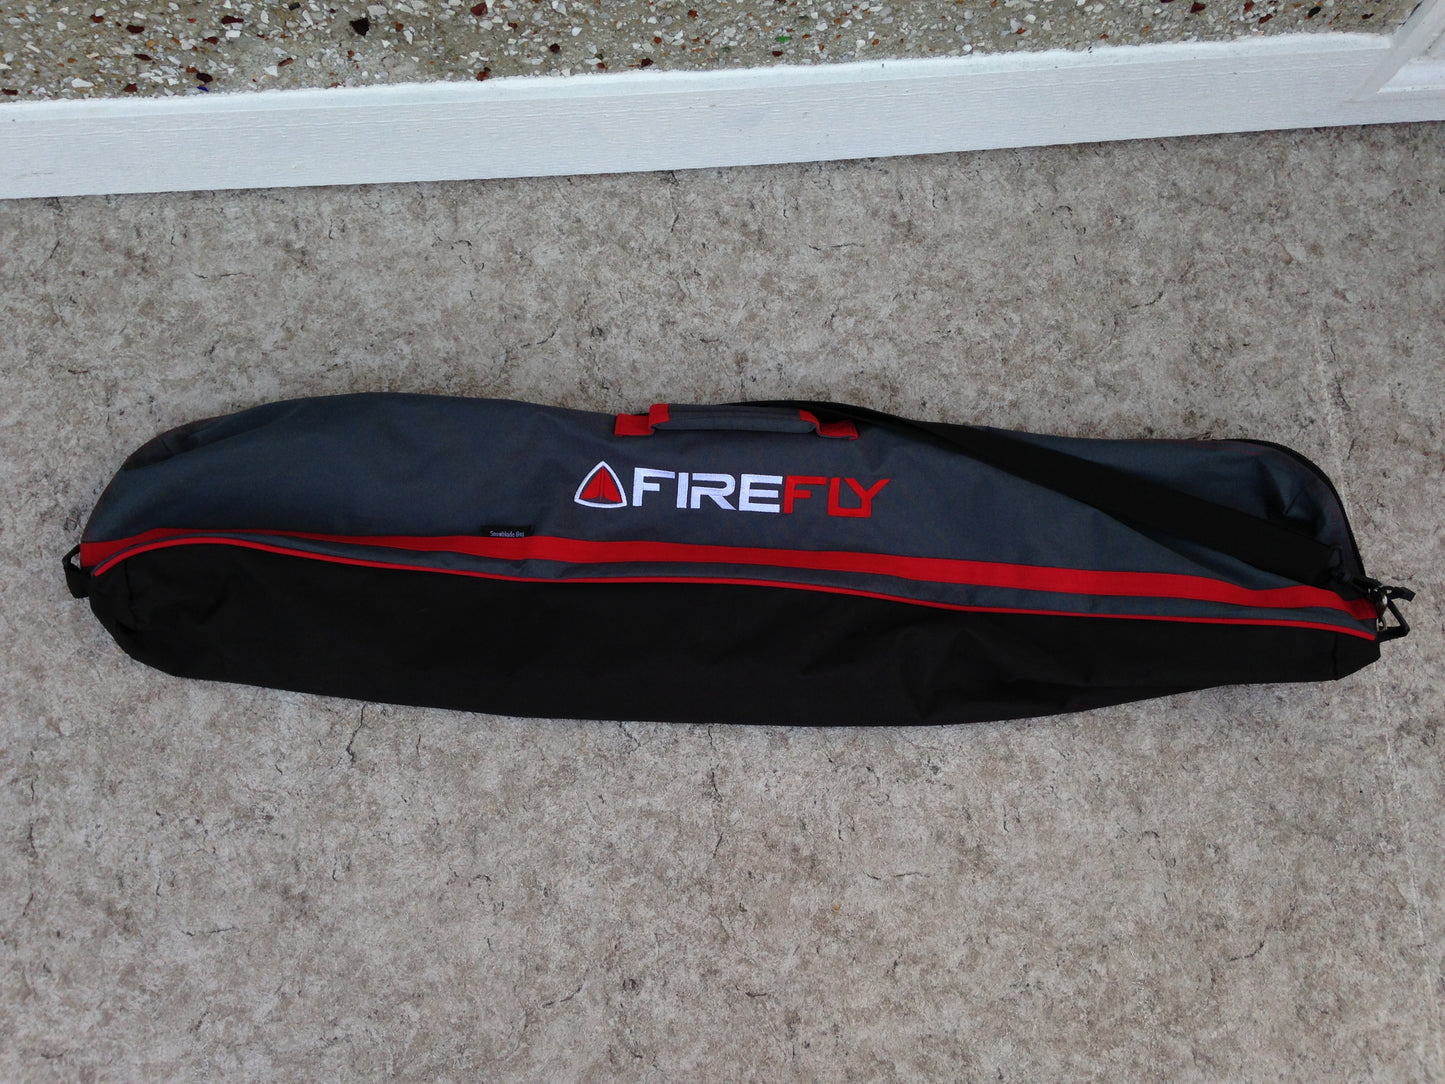 Ski Bag Child Size Firefly Fits Up To 110 cm Black Grey Red As New